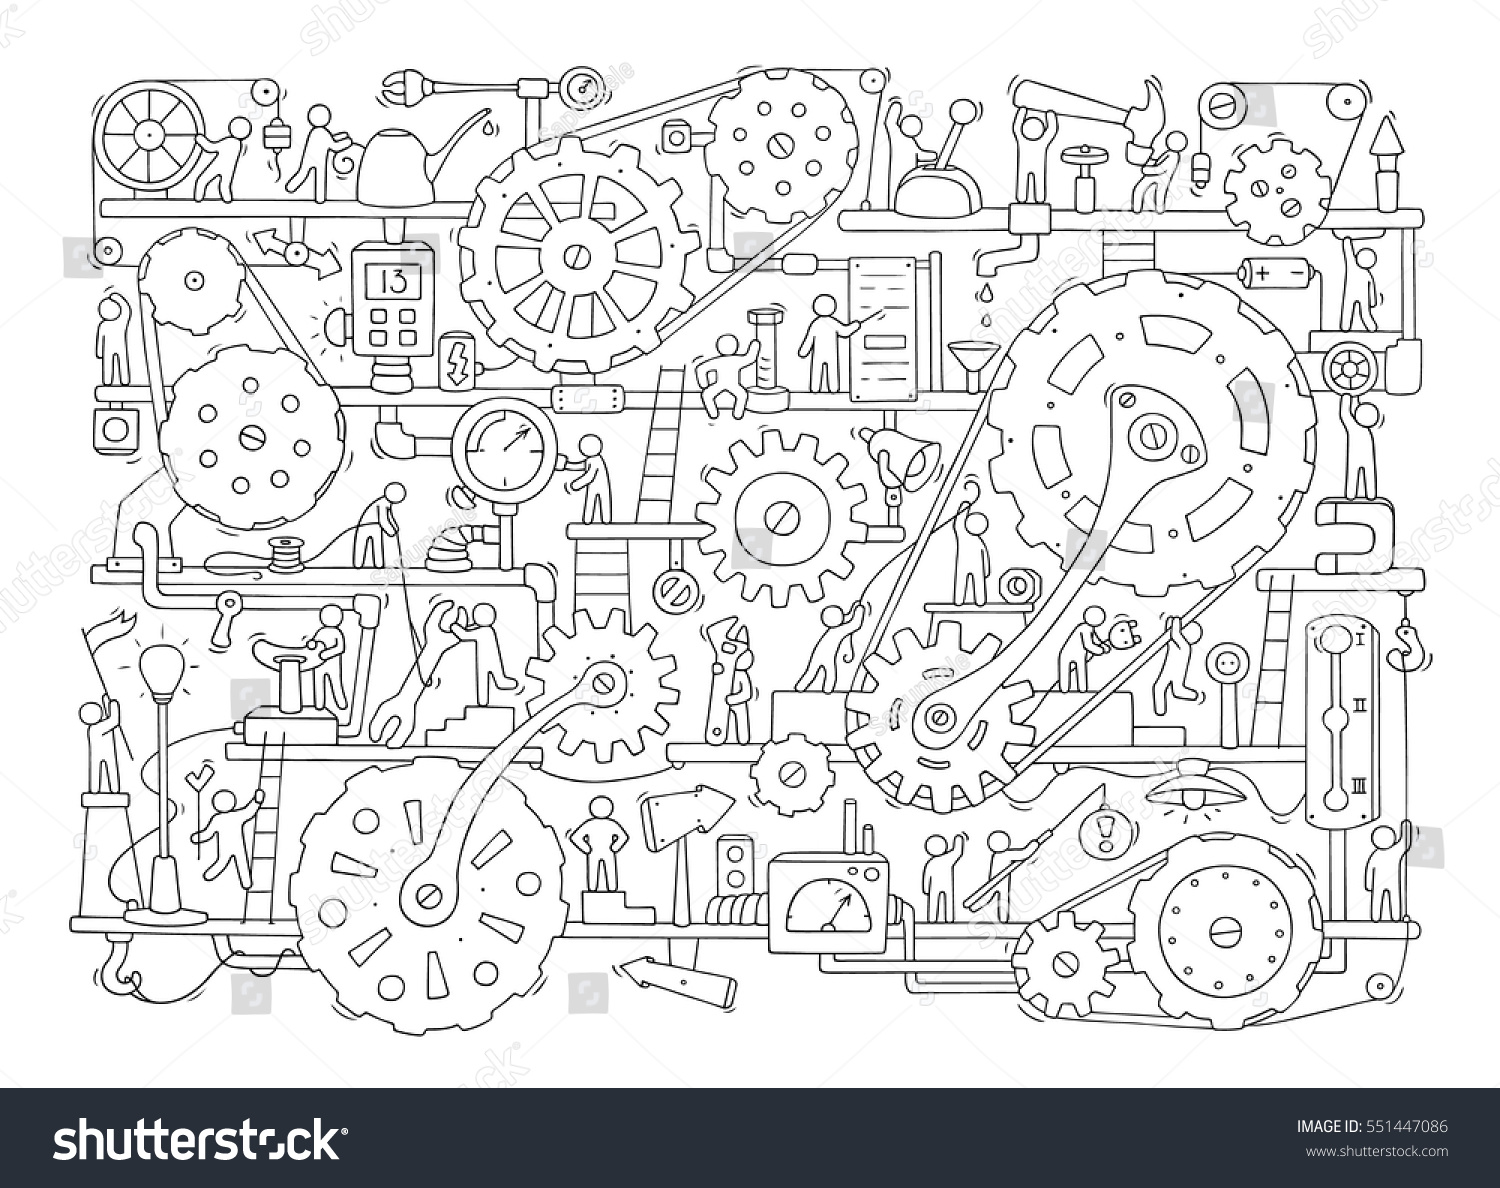 Sketch People Teamwork Gears Production Doodle Stock Vector Royalty